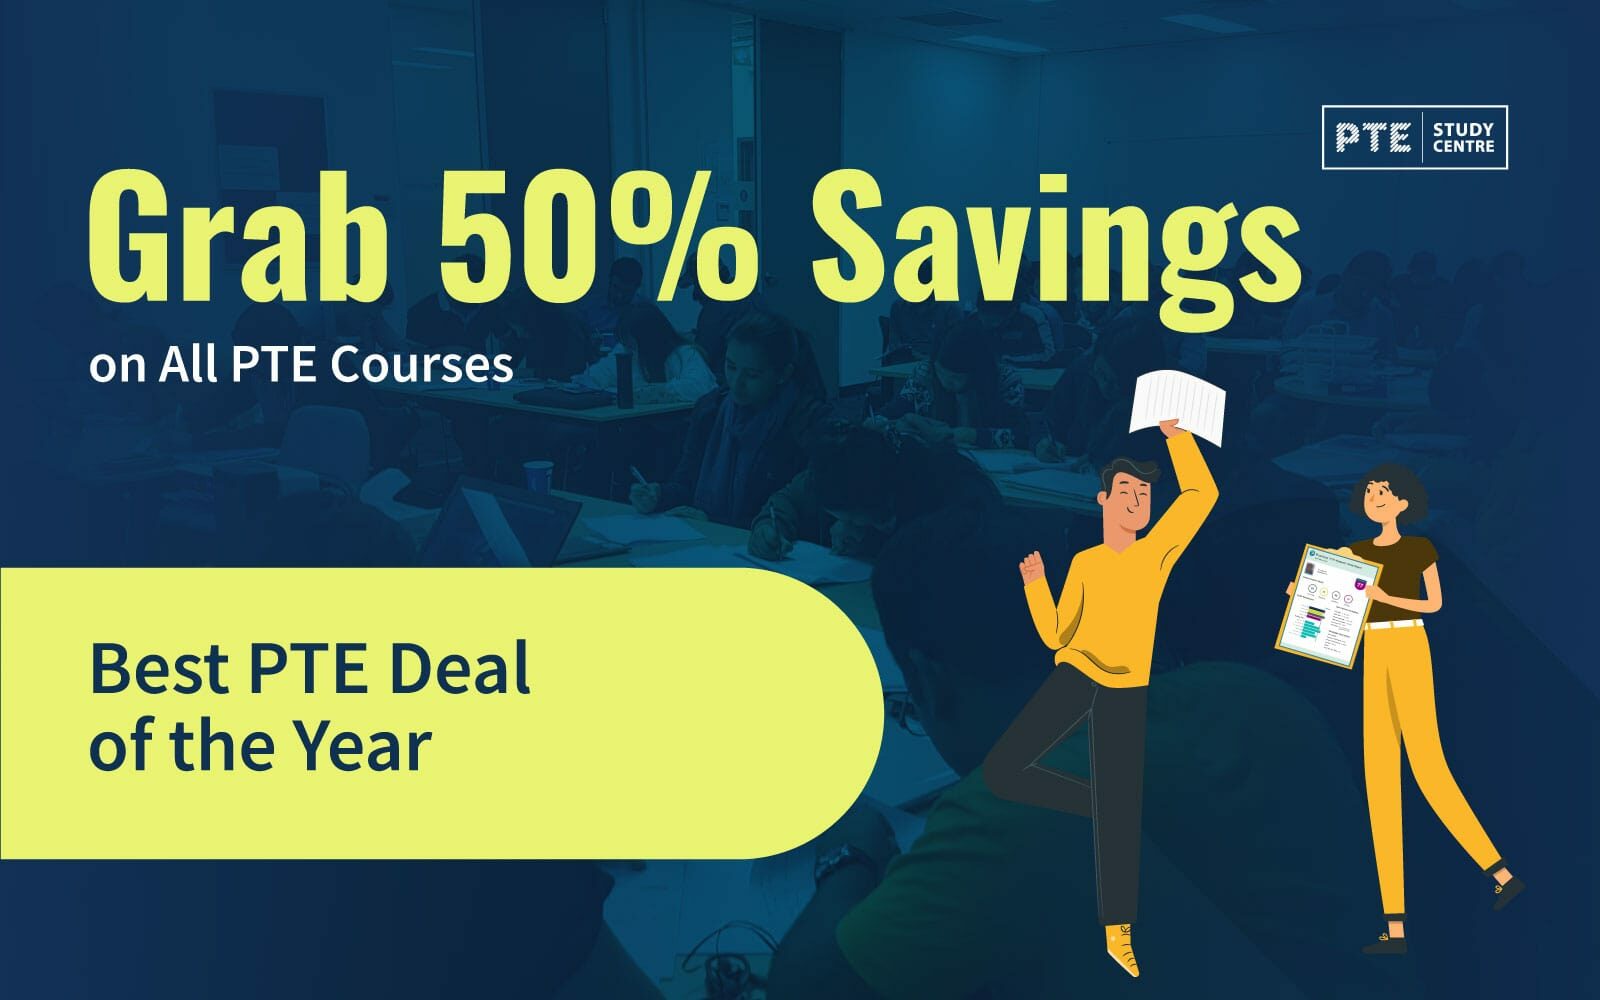 Grab 50% Savings on All PTE Courses image